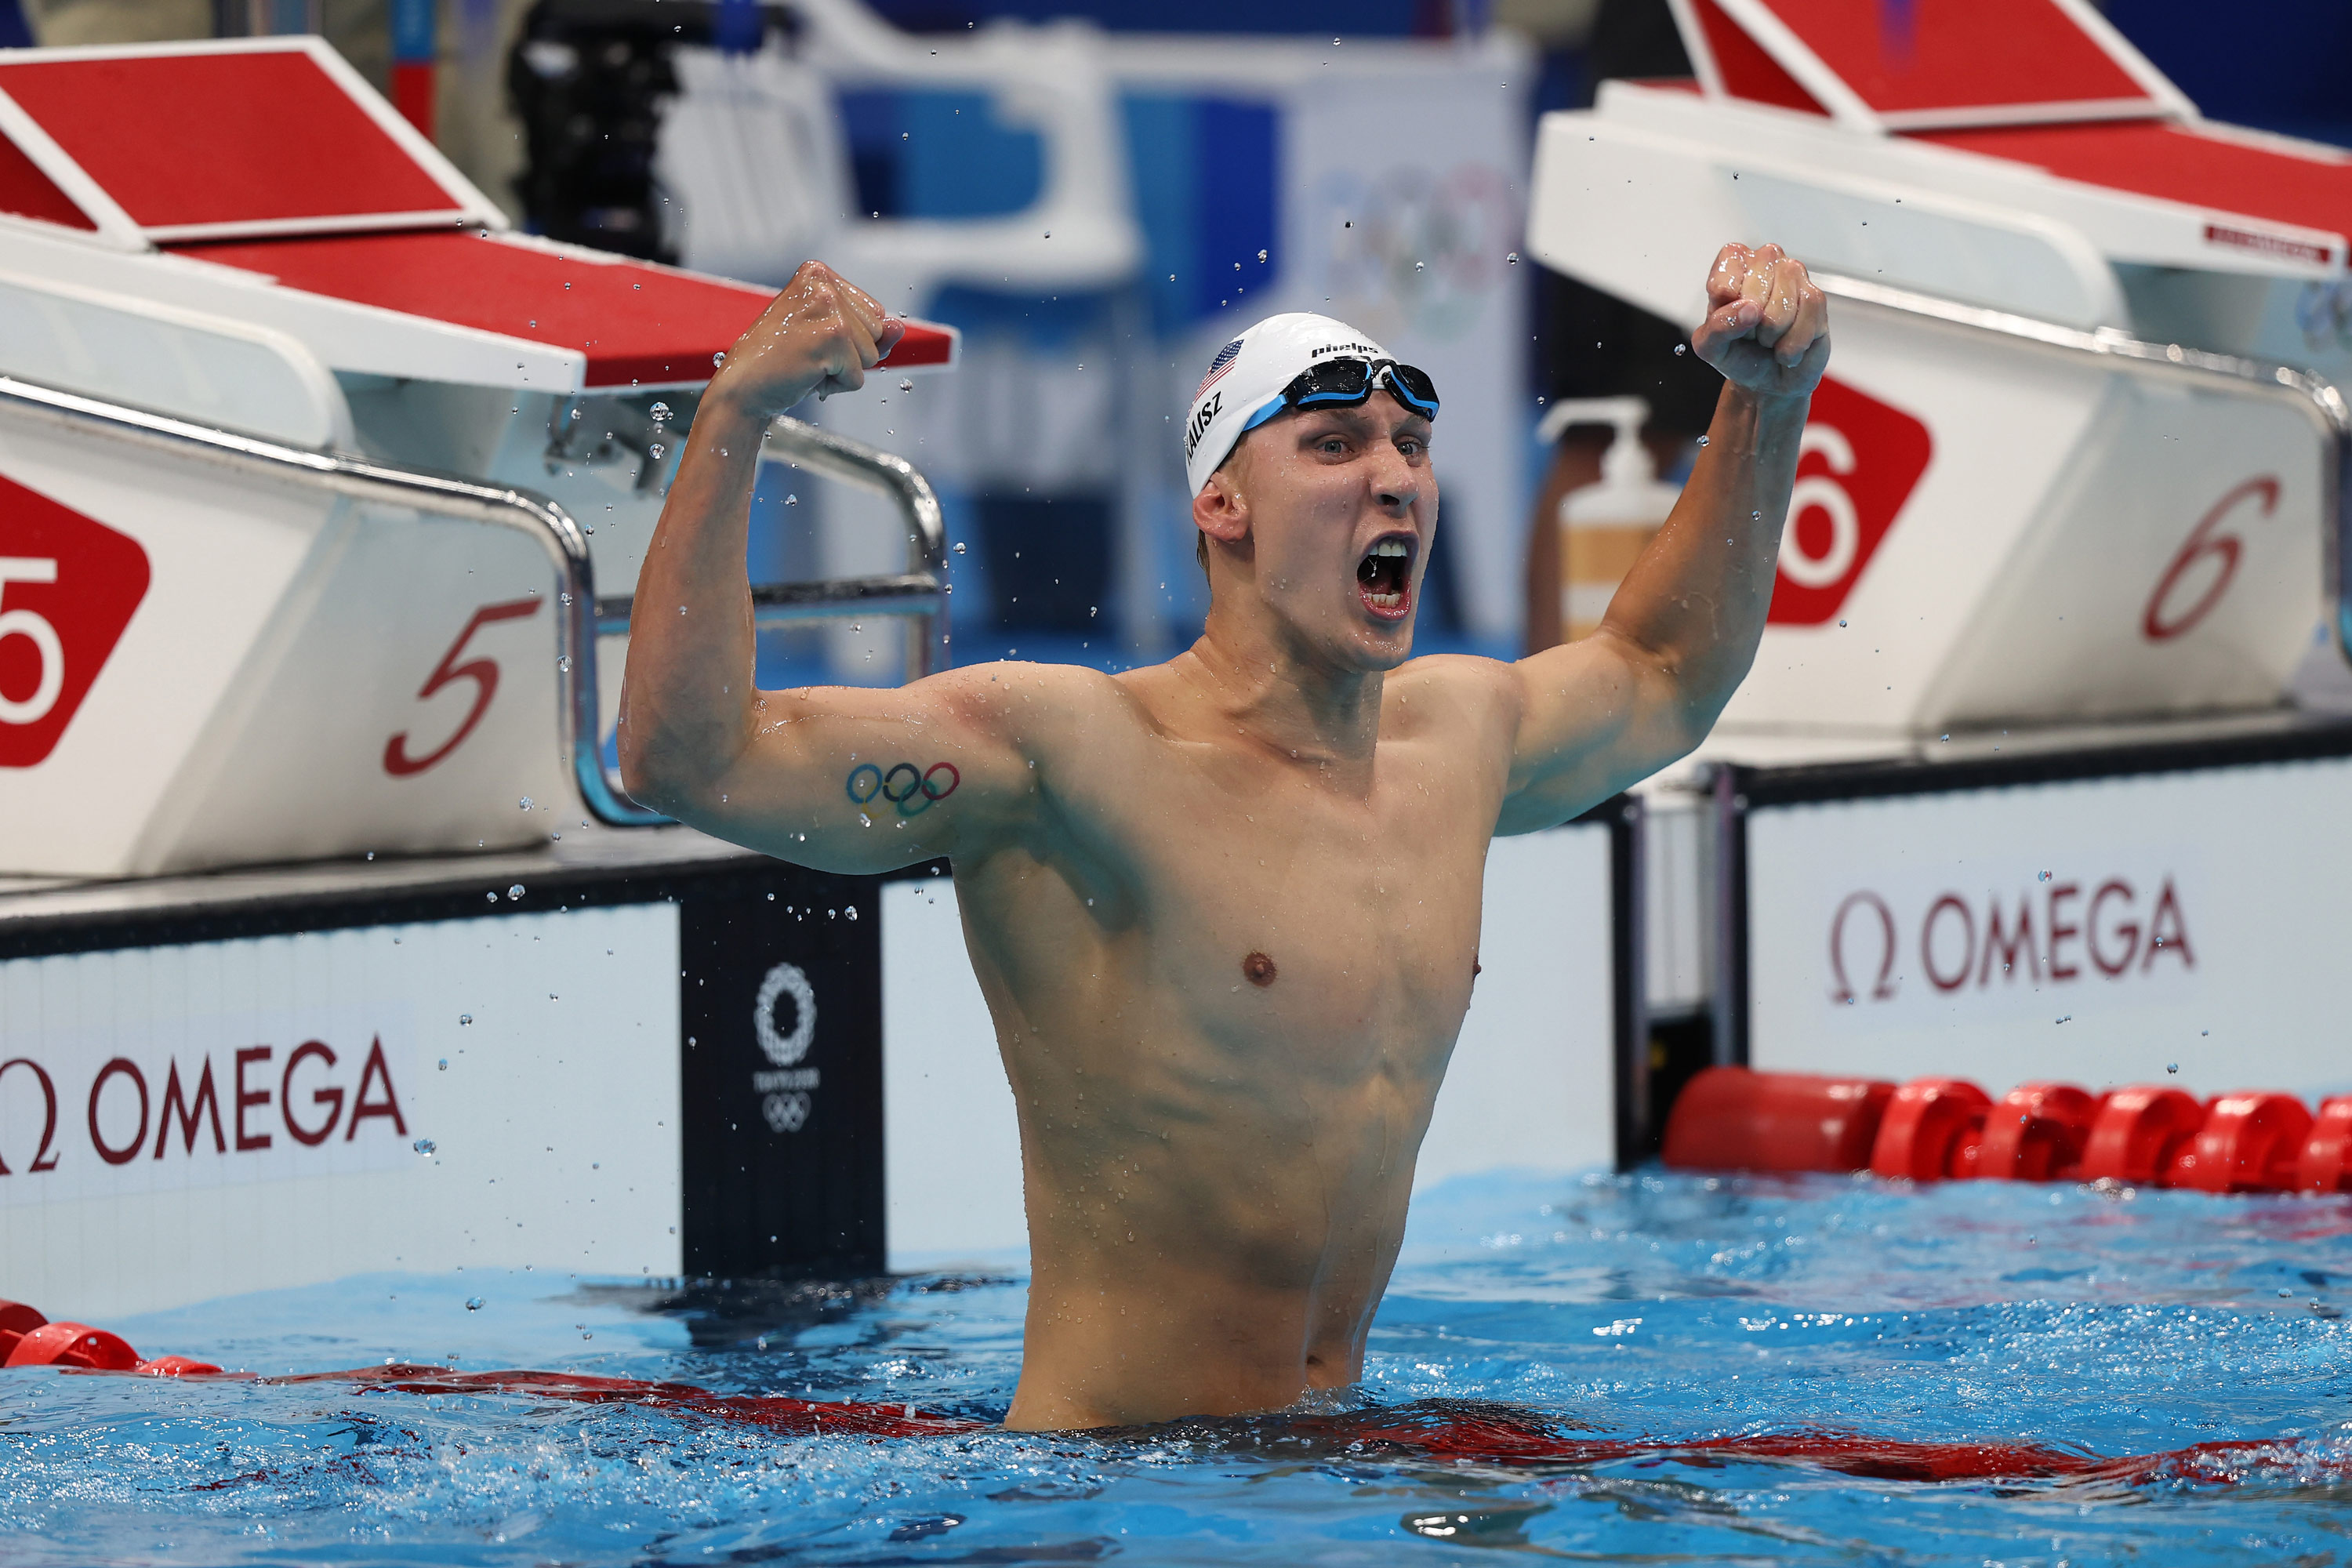 Chase Kalisz of Team United States celebrates after winning the Men's 400m individual medley on July 25.